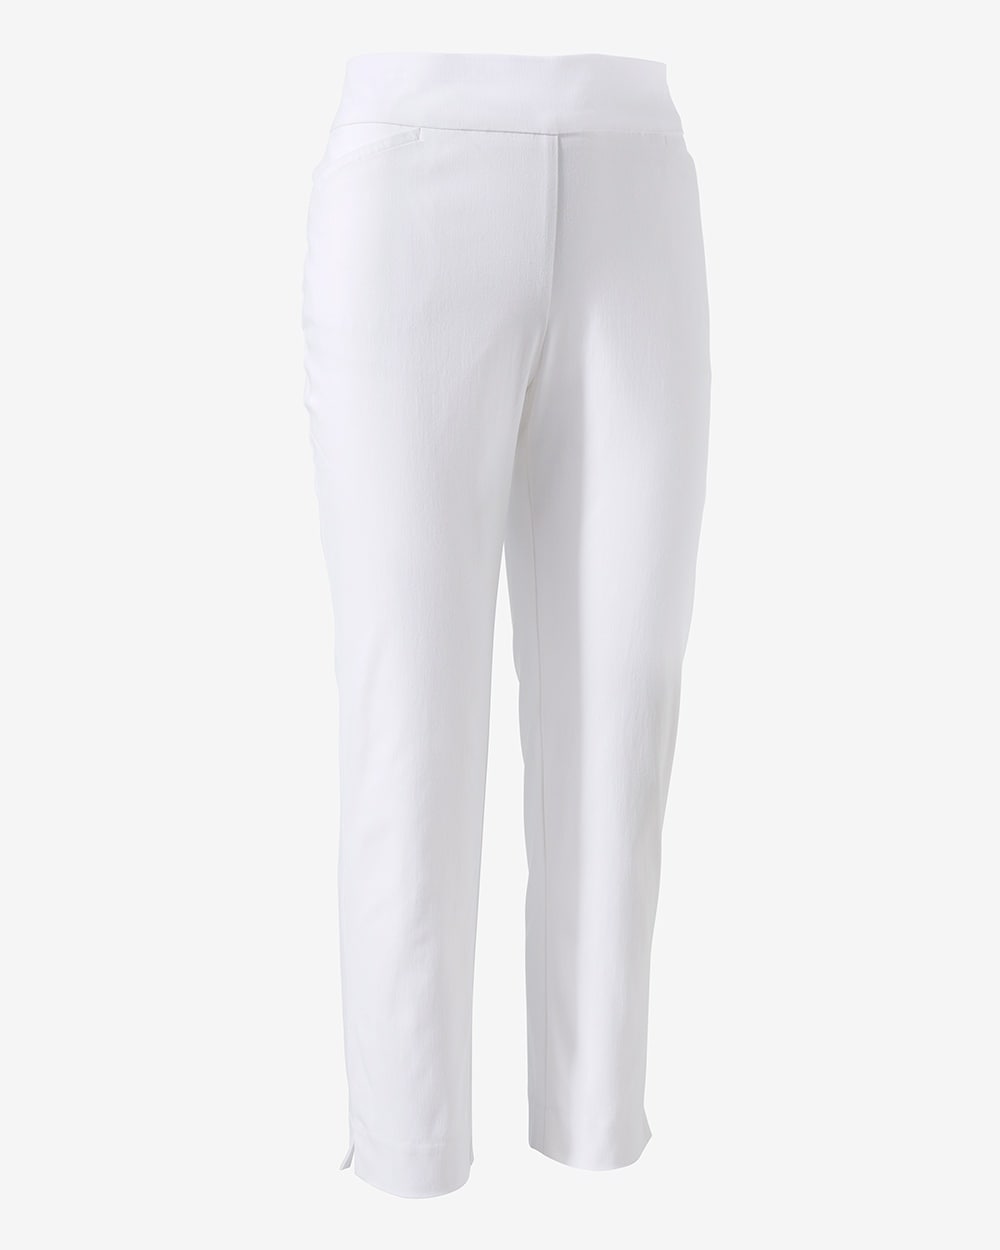 Buy Now,Women's White Cotton Solid Pants - Ethnicity India